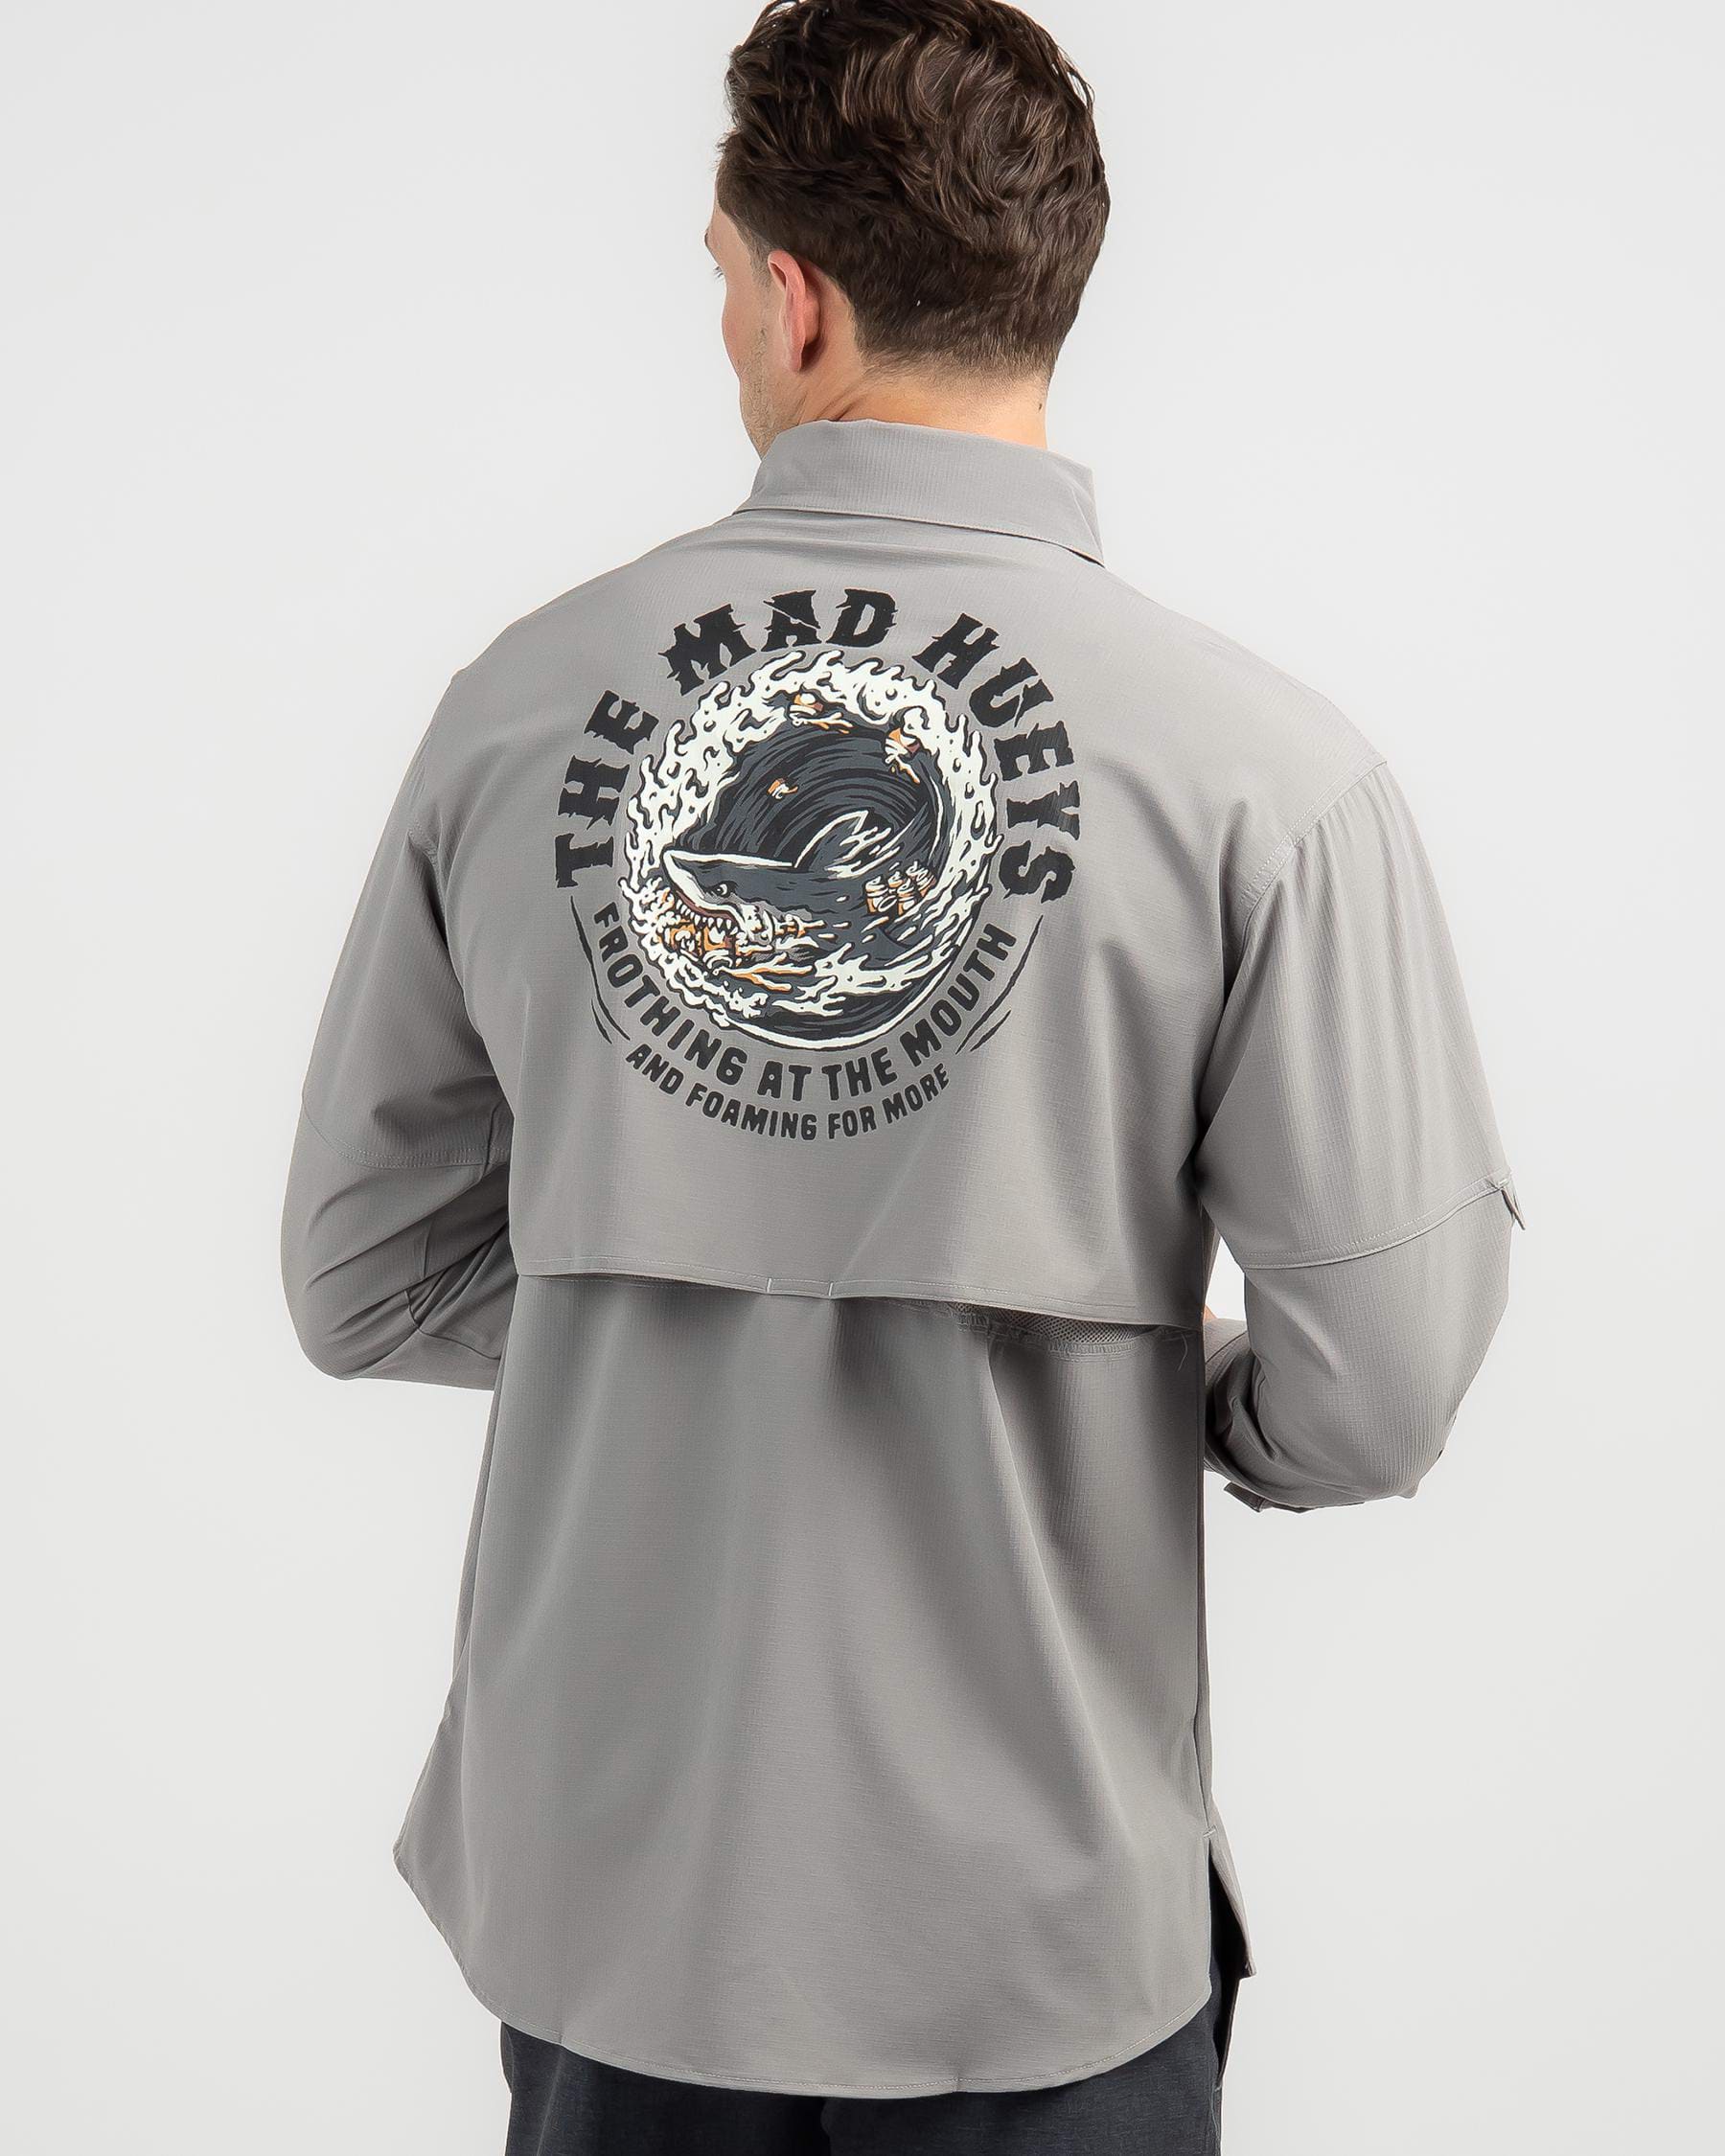 Shop The Mad Hueys Online - Fast Shipping & Easy Returns - City